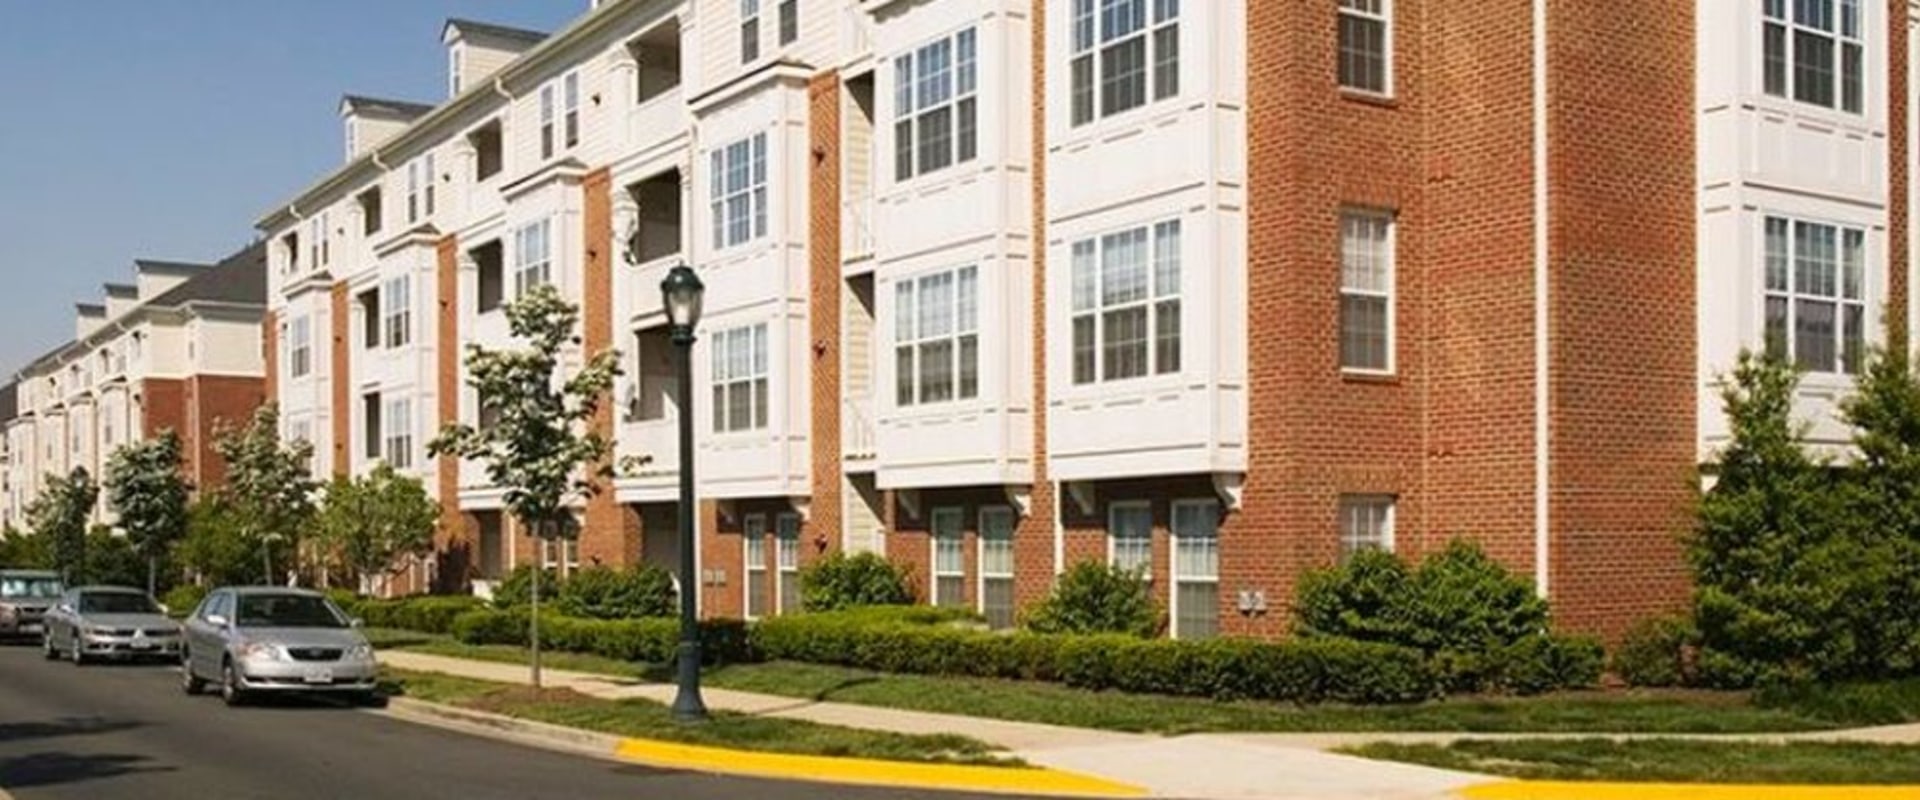 Addressing Affordable Housing and Homelessness in Rockville, MD: An Expert's Perspective